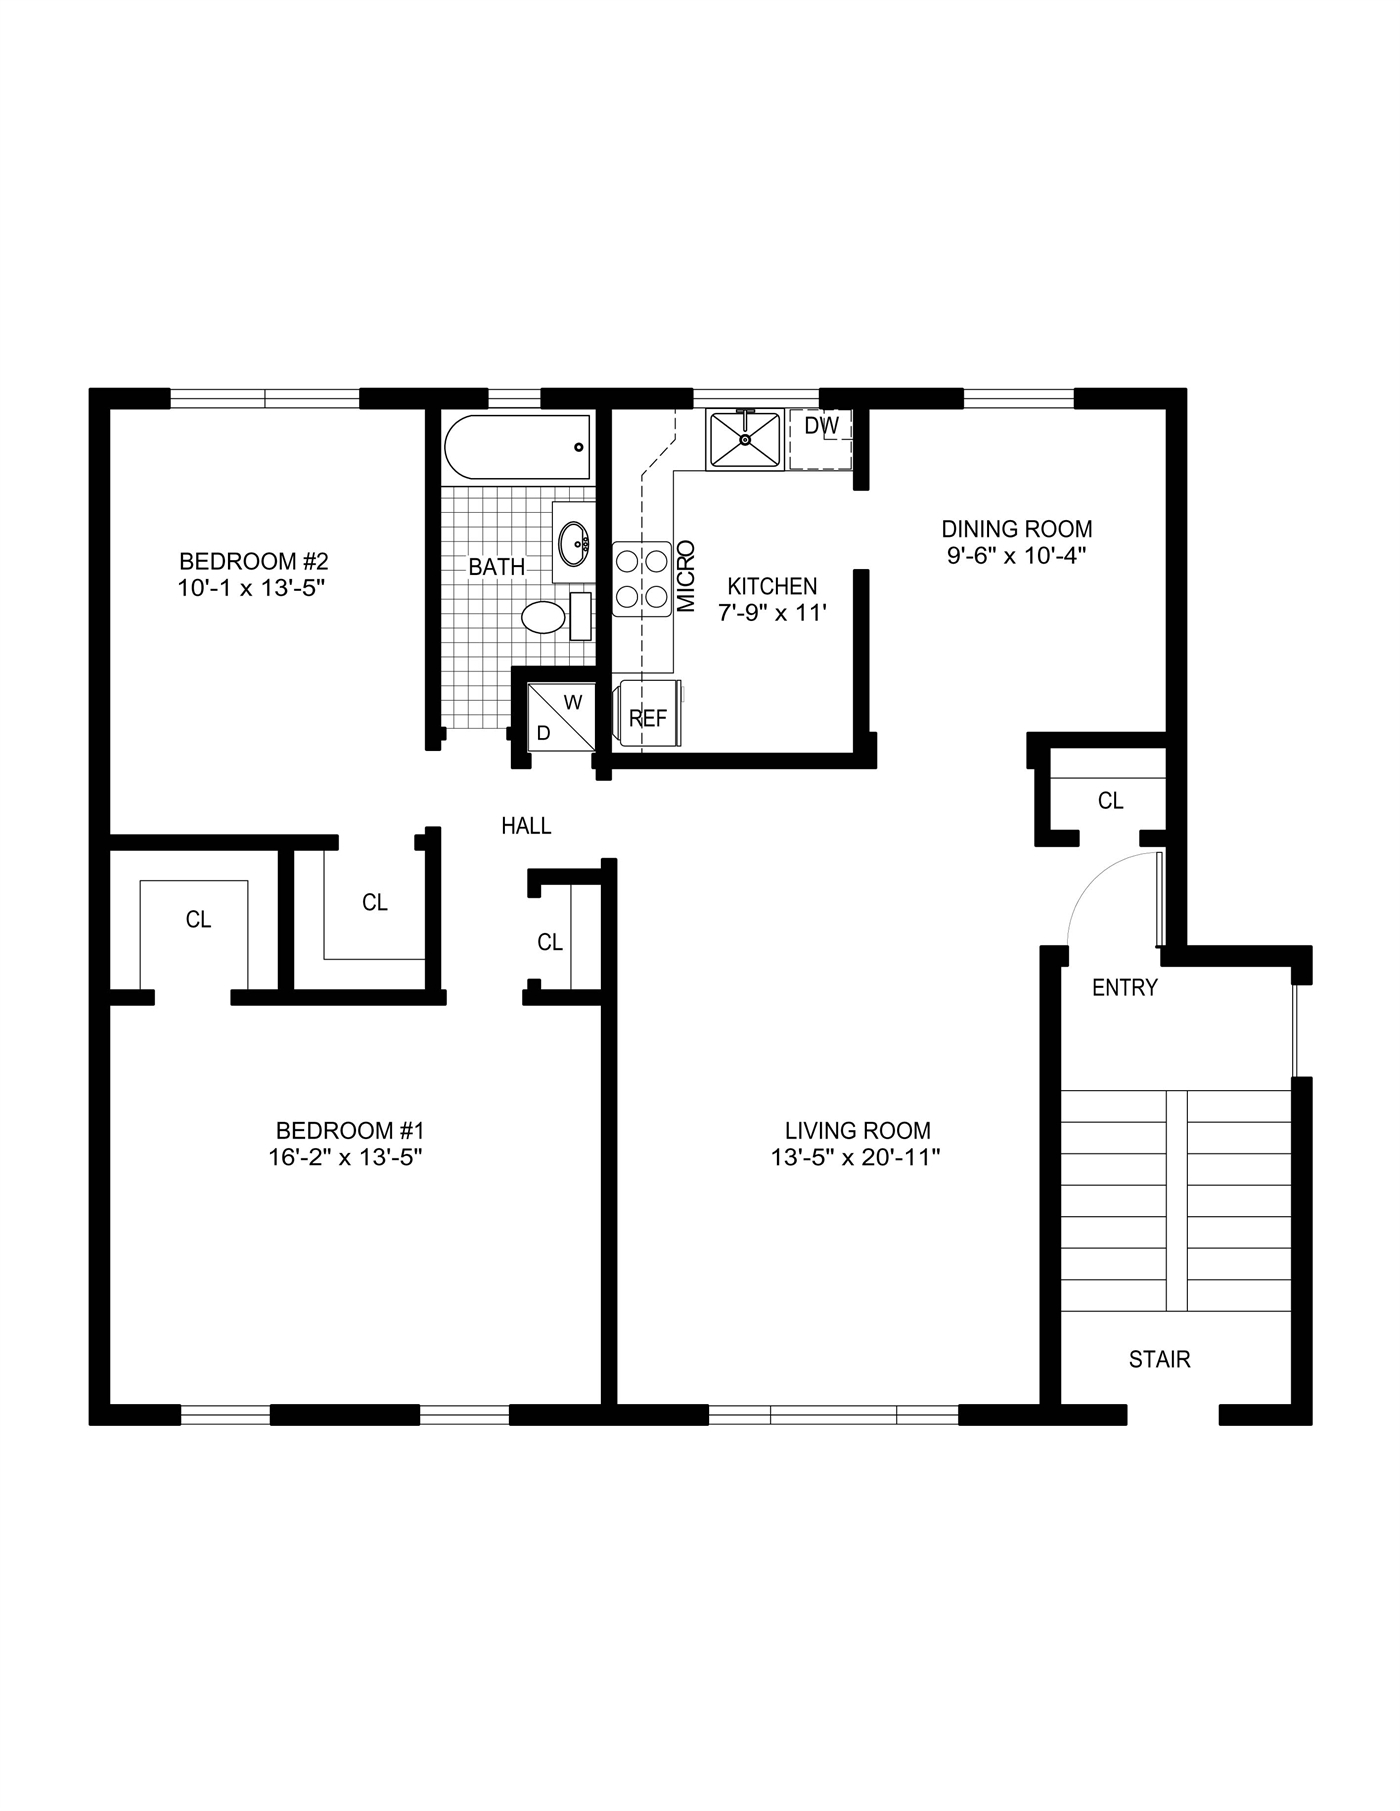 Home Design Drawing Free Download Best Home Design Drawing